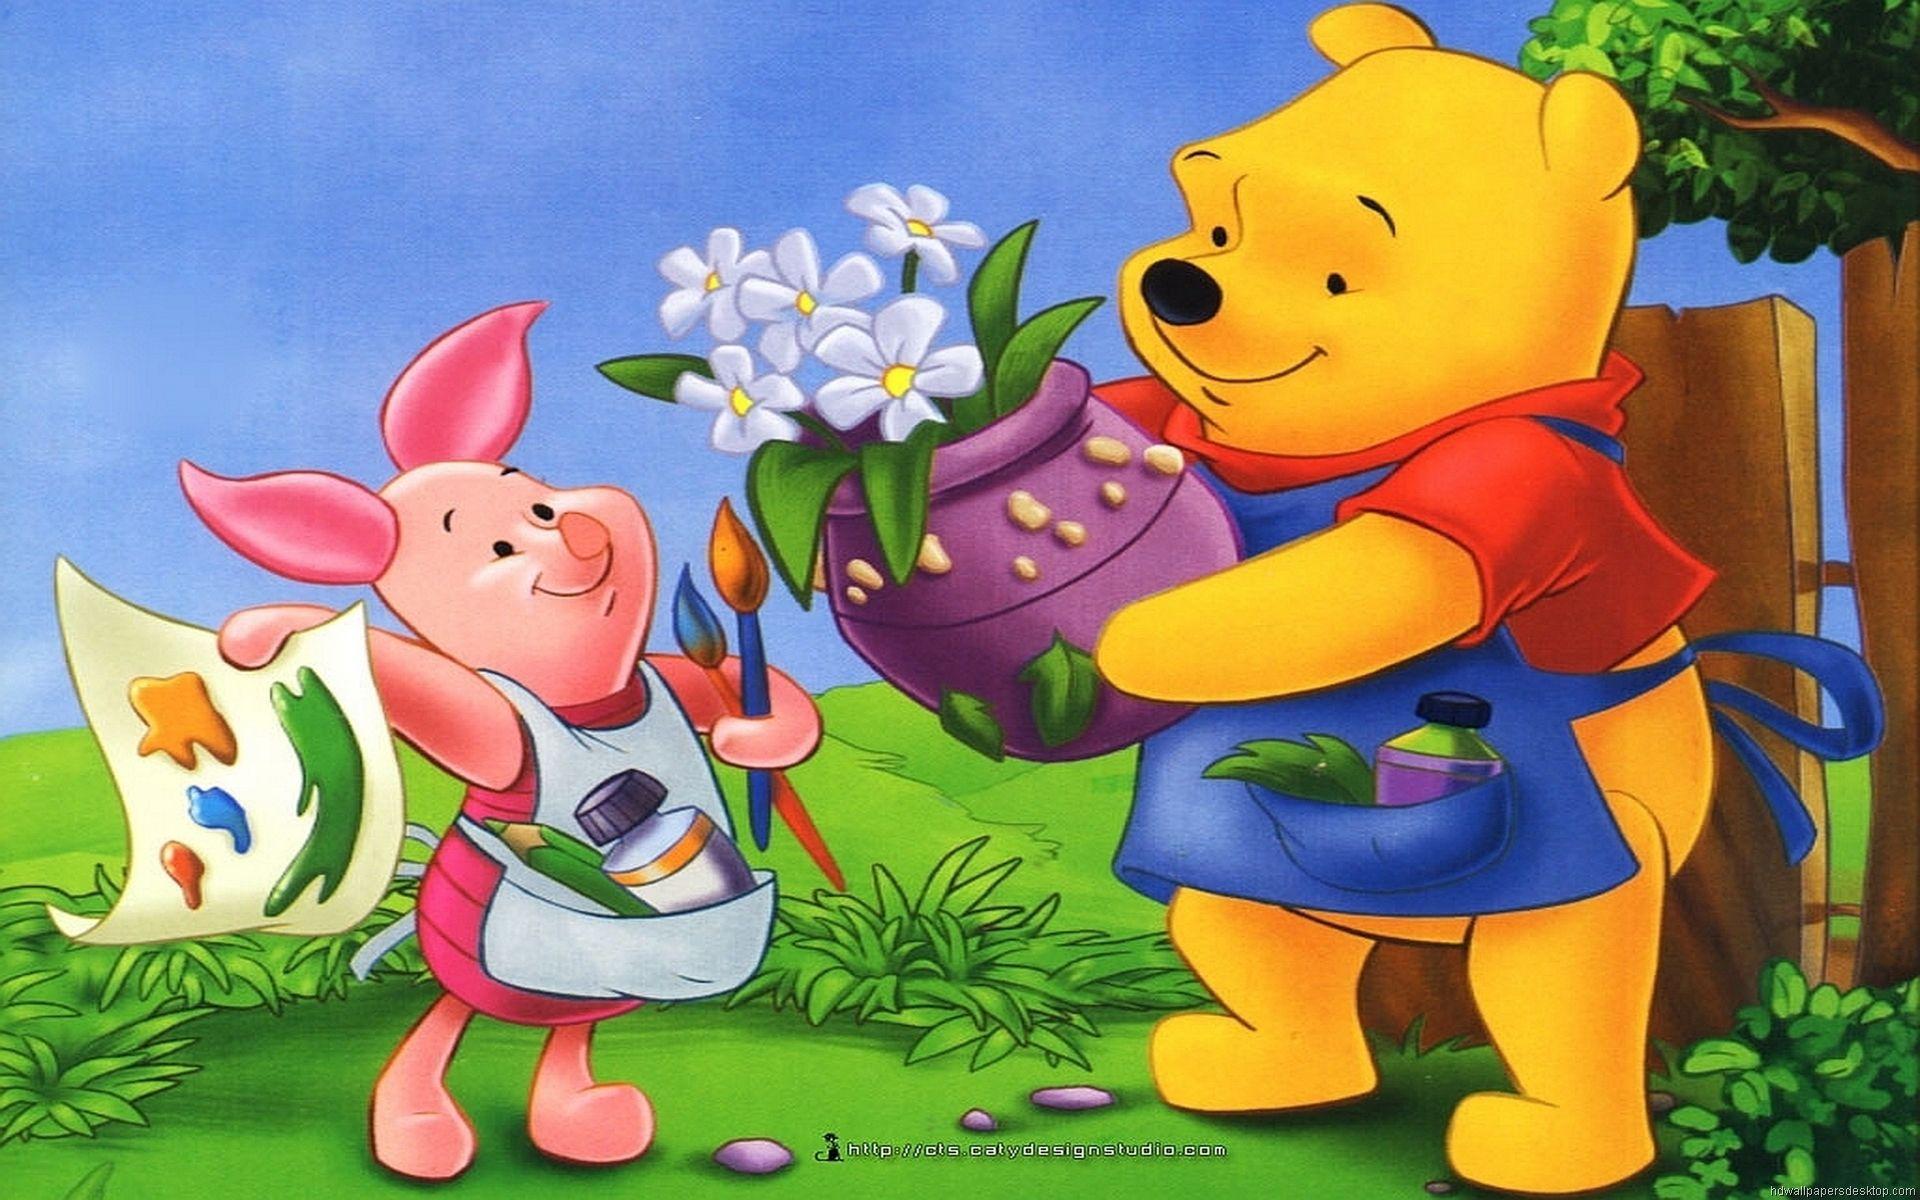 Wallpapers Of Winnie The Pooh Group